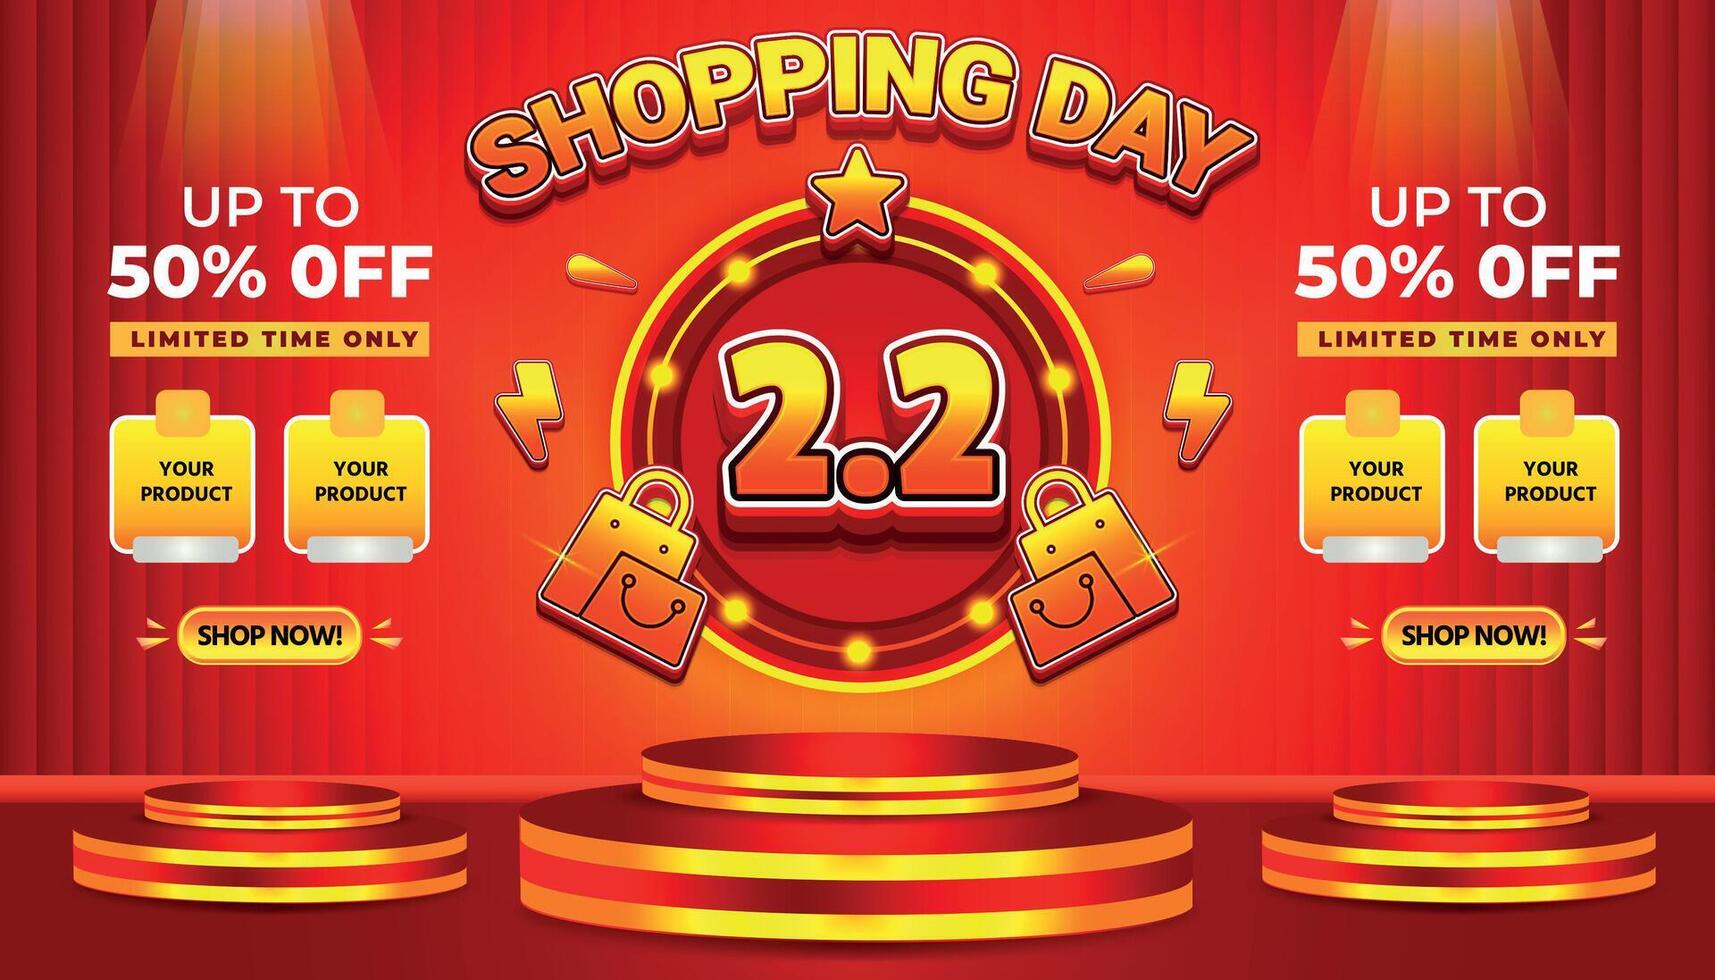 2 2 SALE SHOPPING DAY SUPER SALE EVENT 50 PERCENT OFF BACKGROUND SOCIAL MEDIA vector